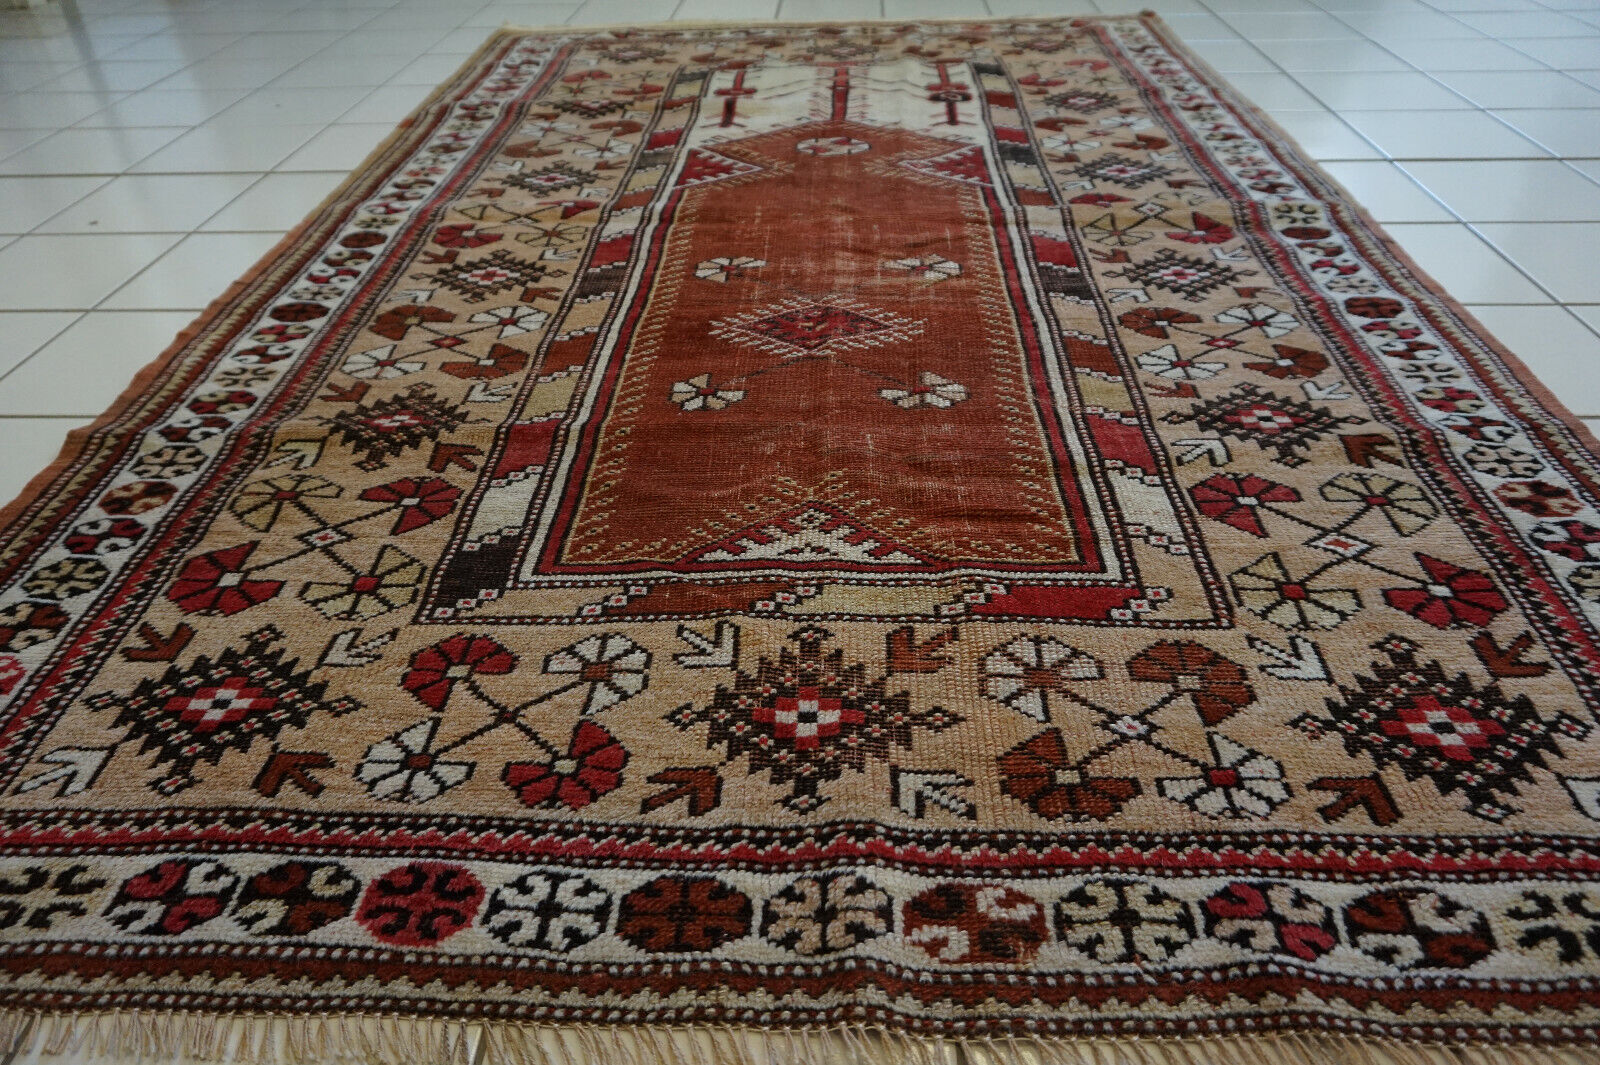 Artistic display of the Handmade Traditional Turkish Melas Rug as a room centerpiece